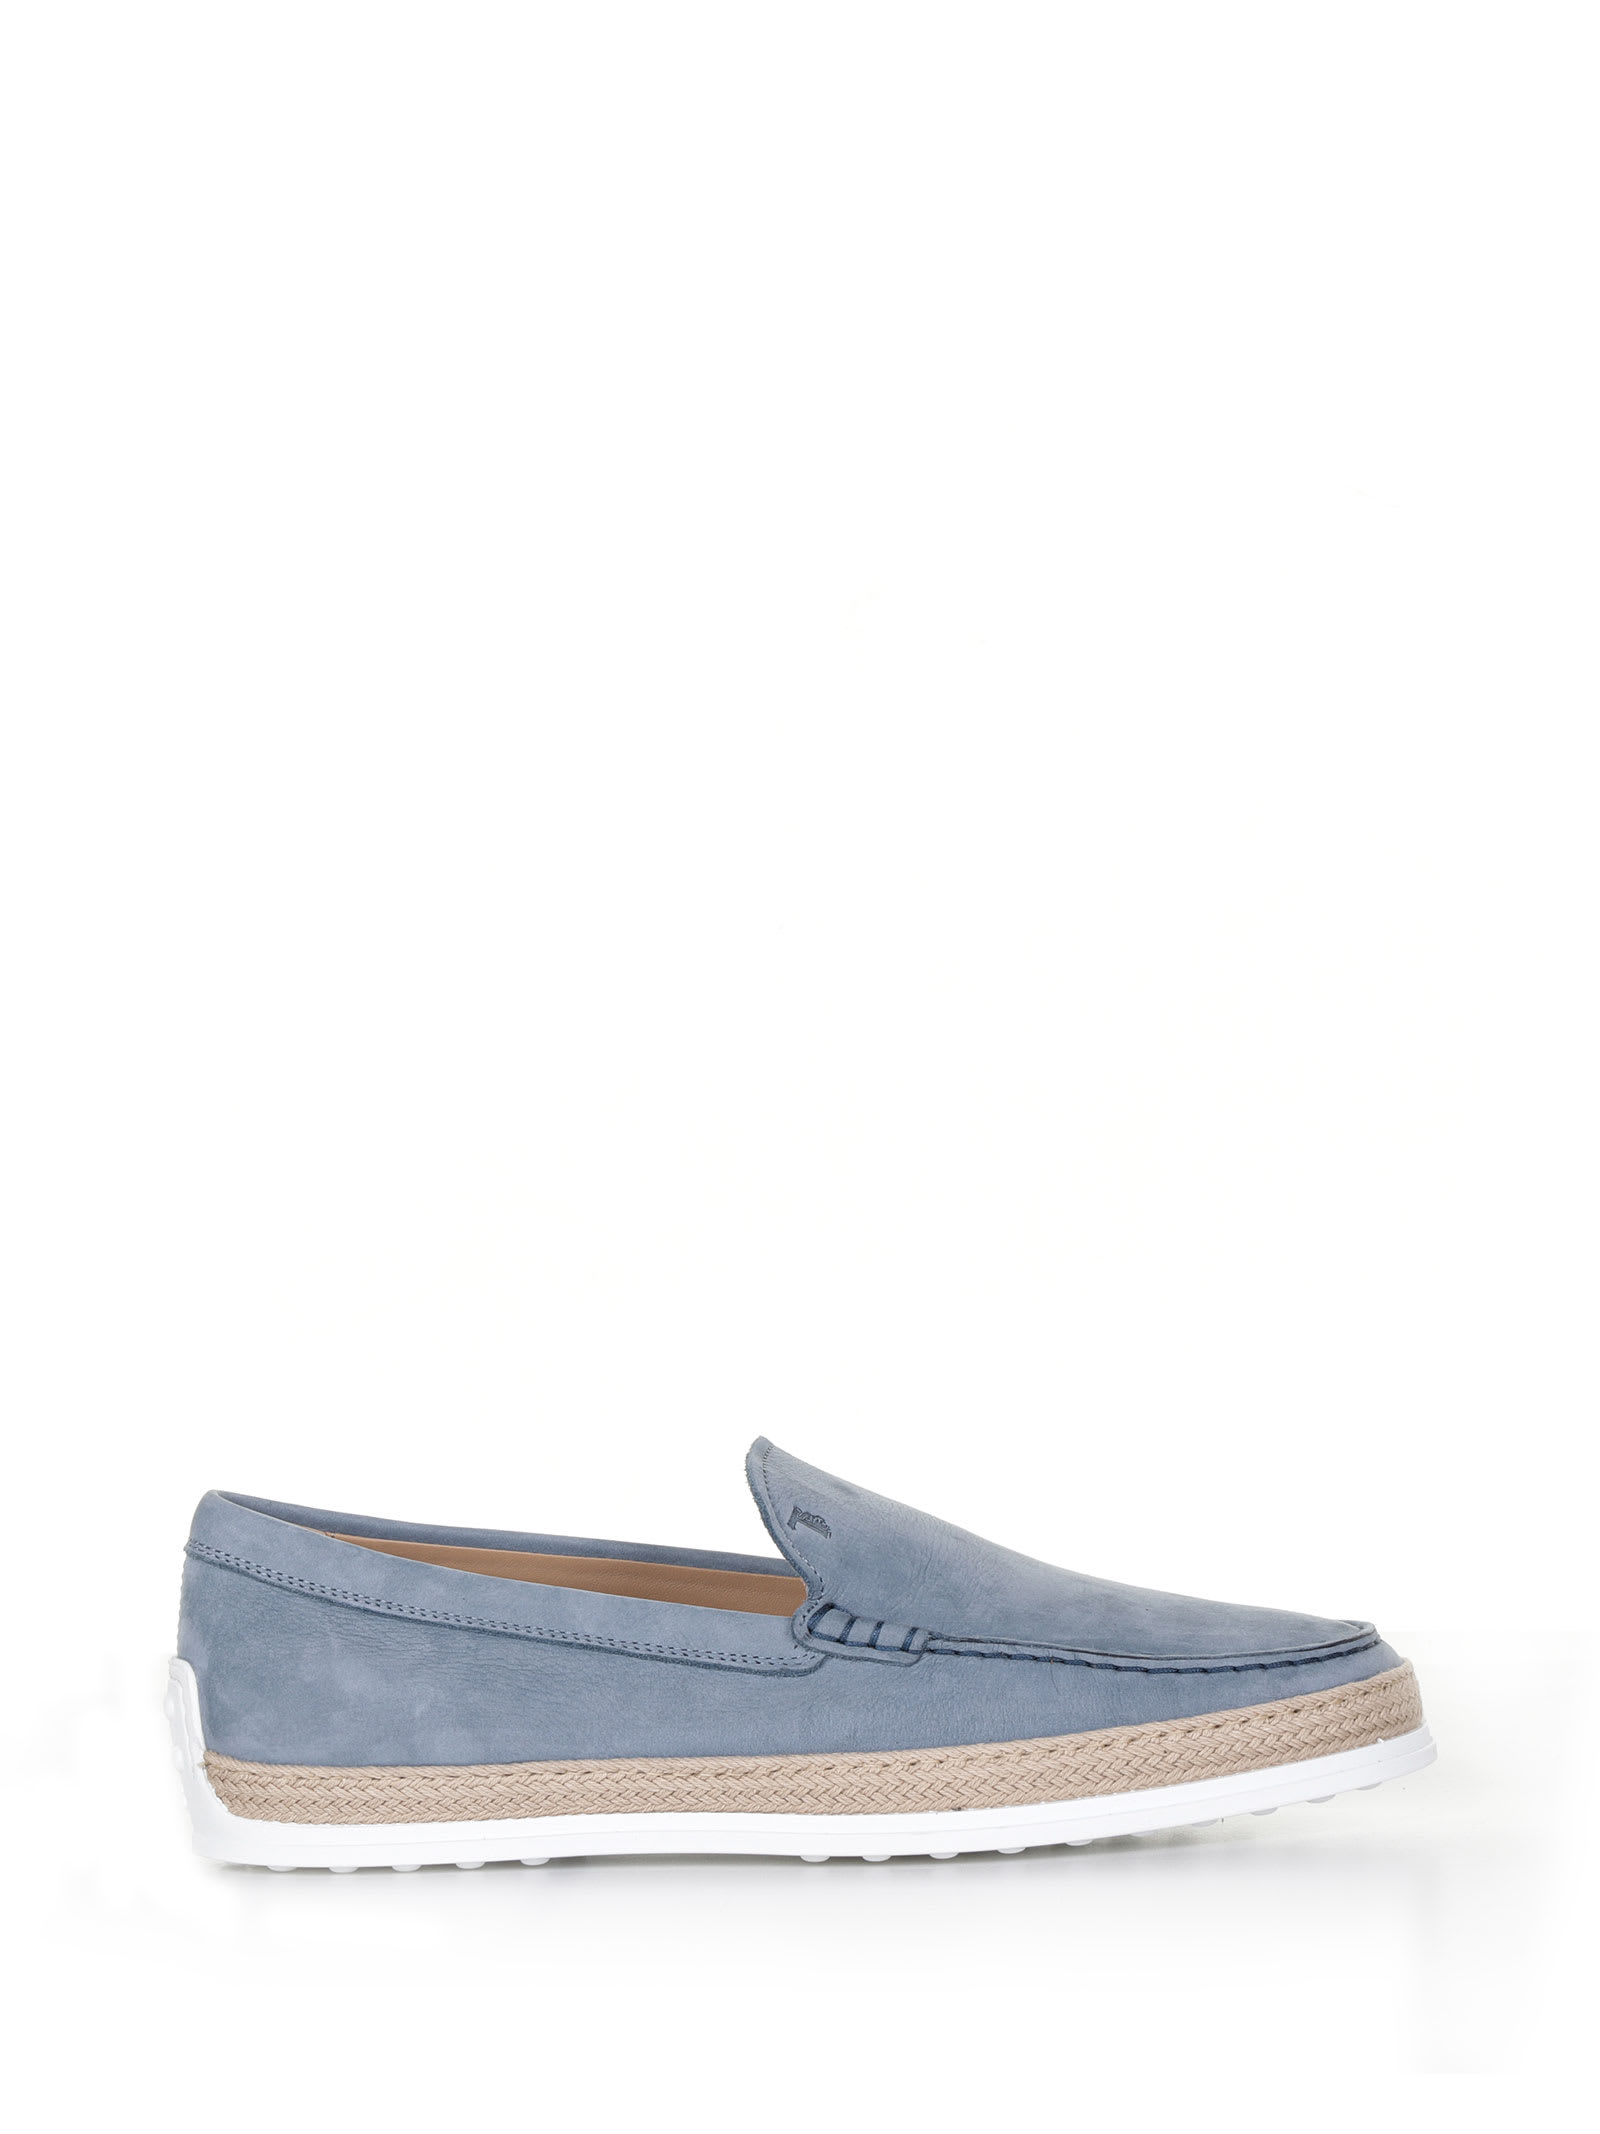 TOD'S LOAFER SLIPPER IN SUEDE